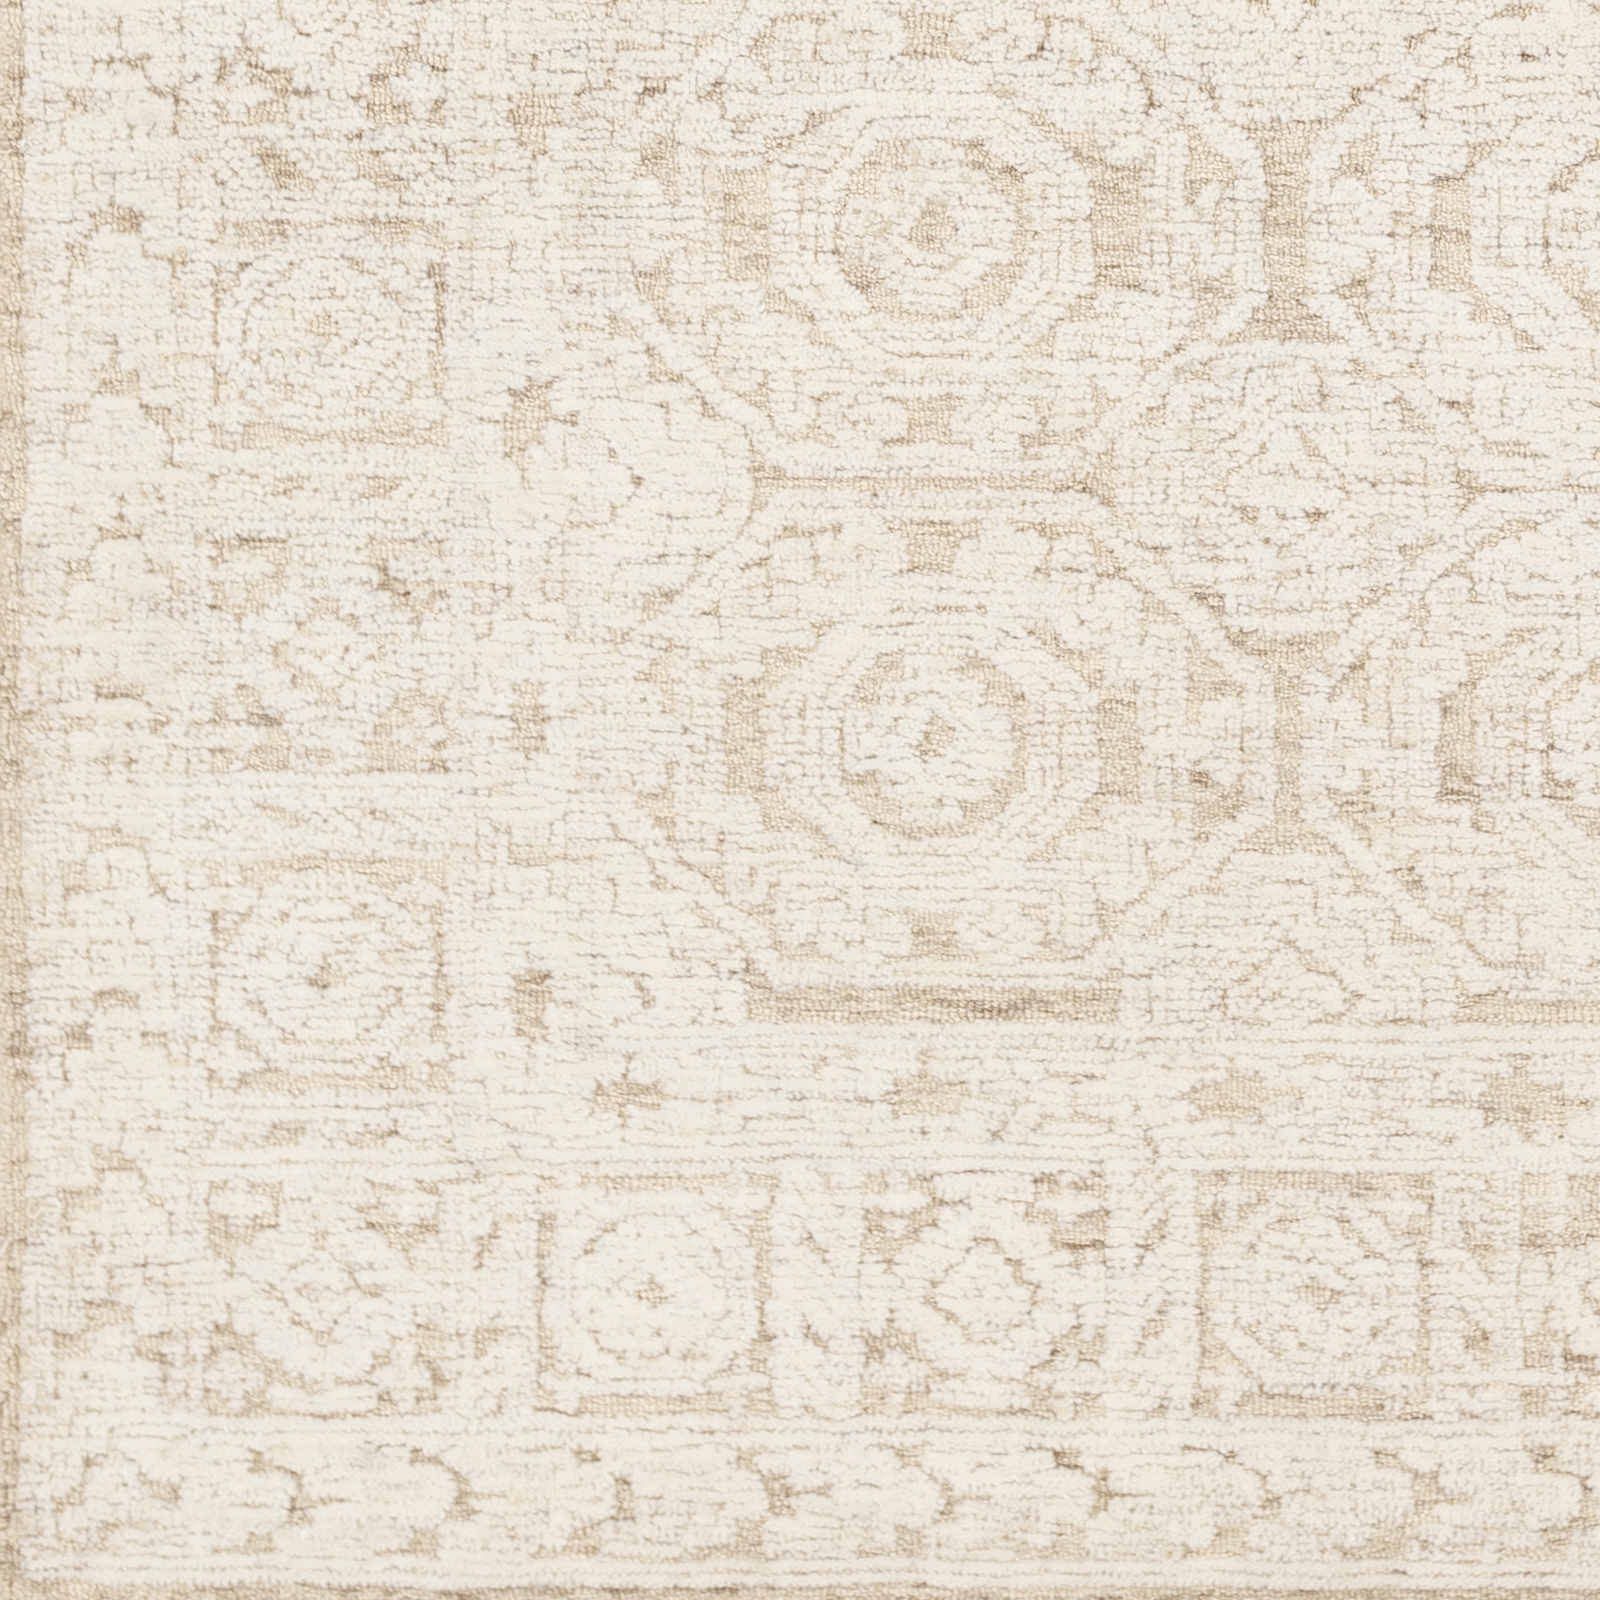 Louvre Rug, 8' x 10' - Image 2